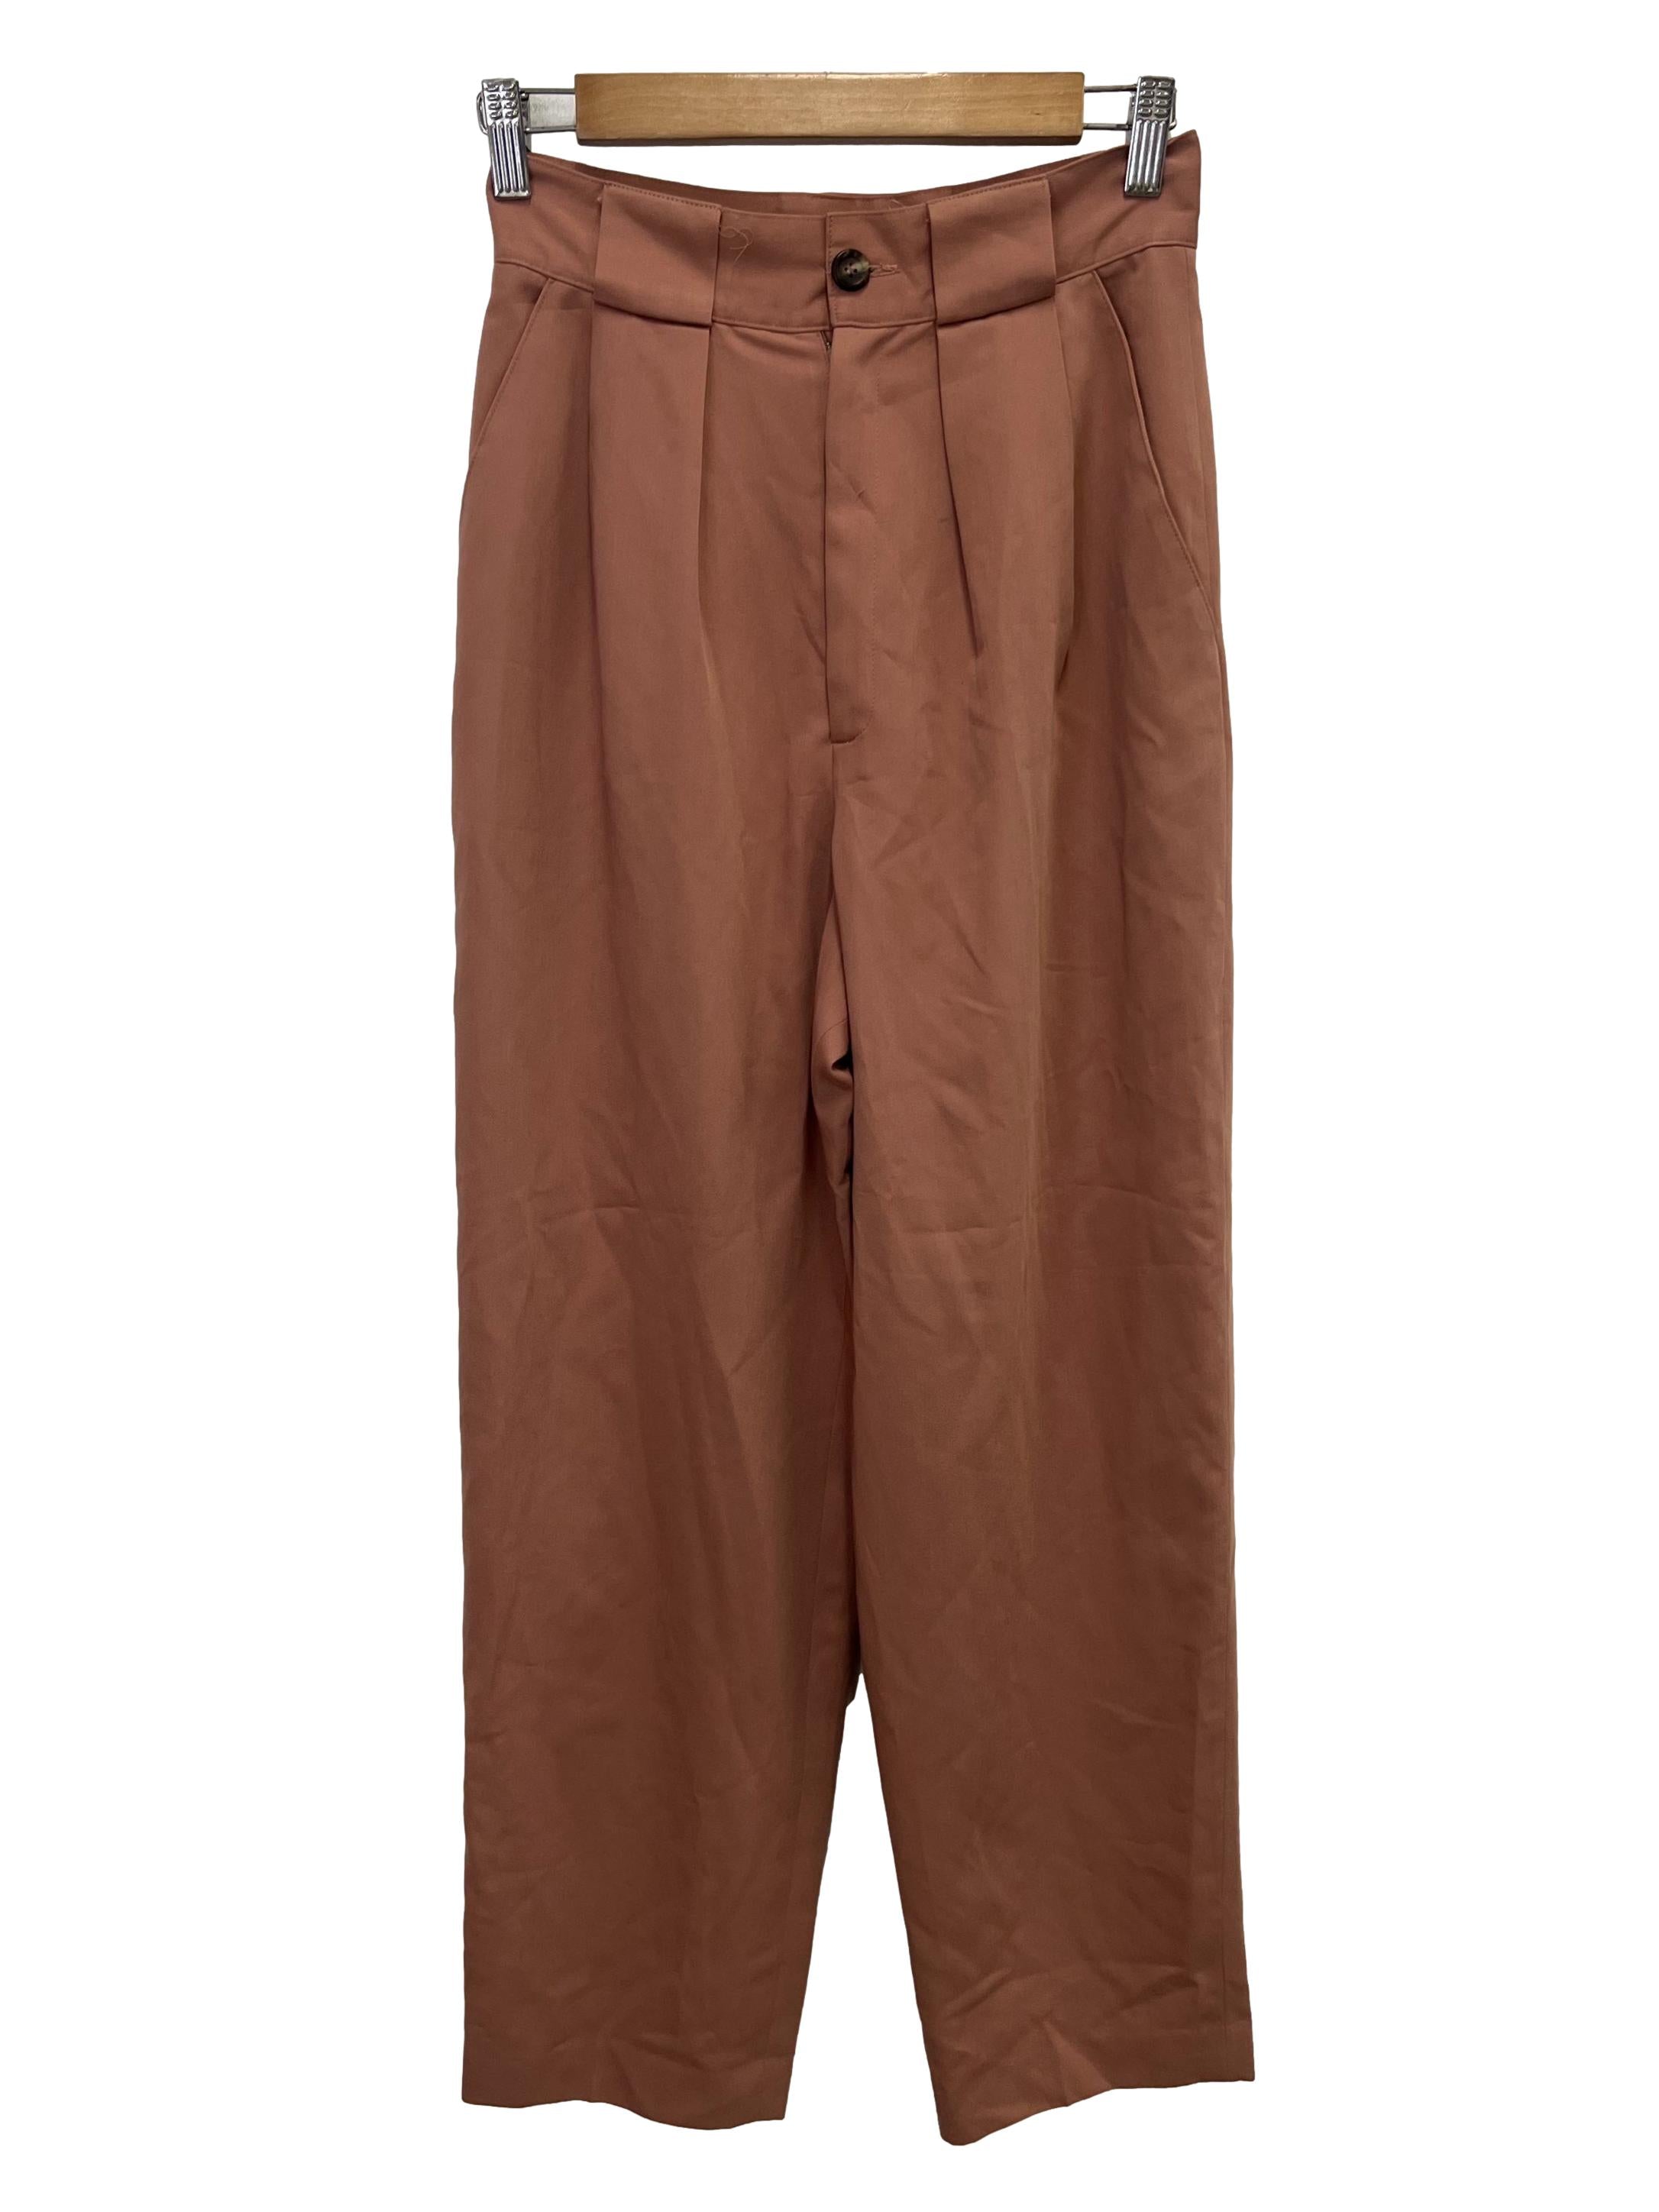 Brown Pleated Flare Pants